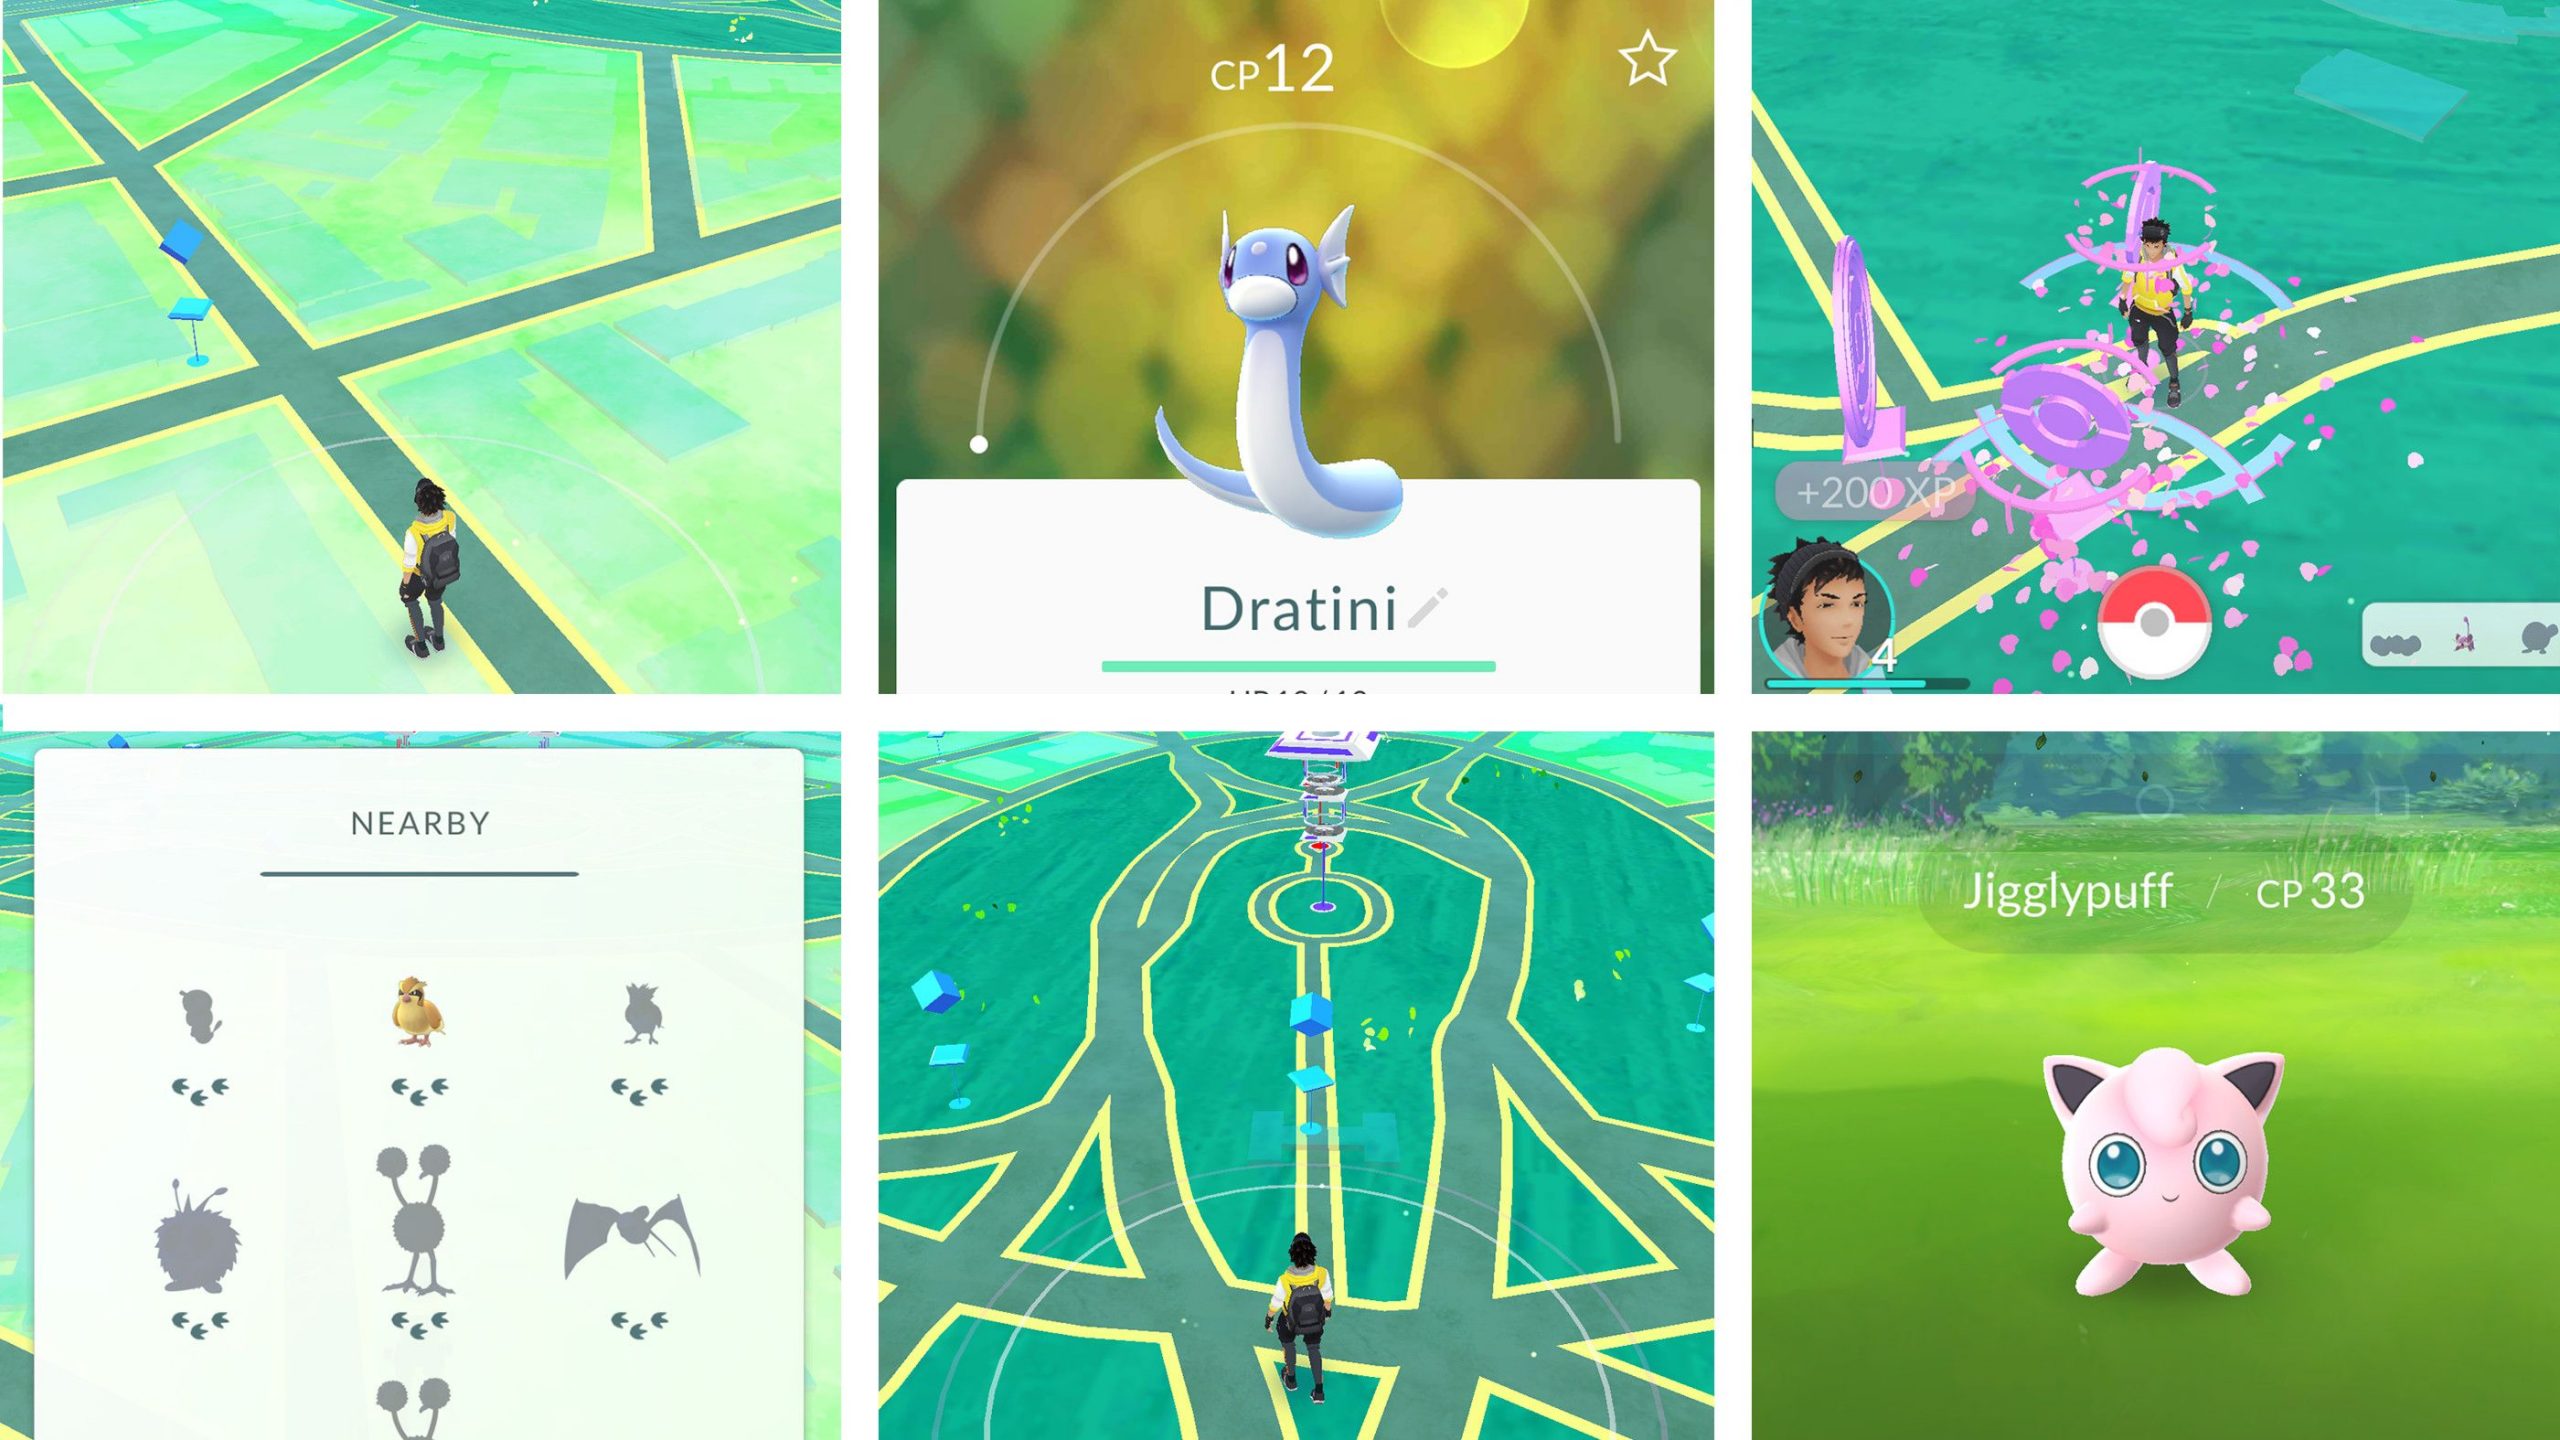 Pokémon Go – The Best Profit Earning Game within Four Years of Launch